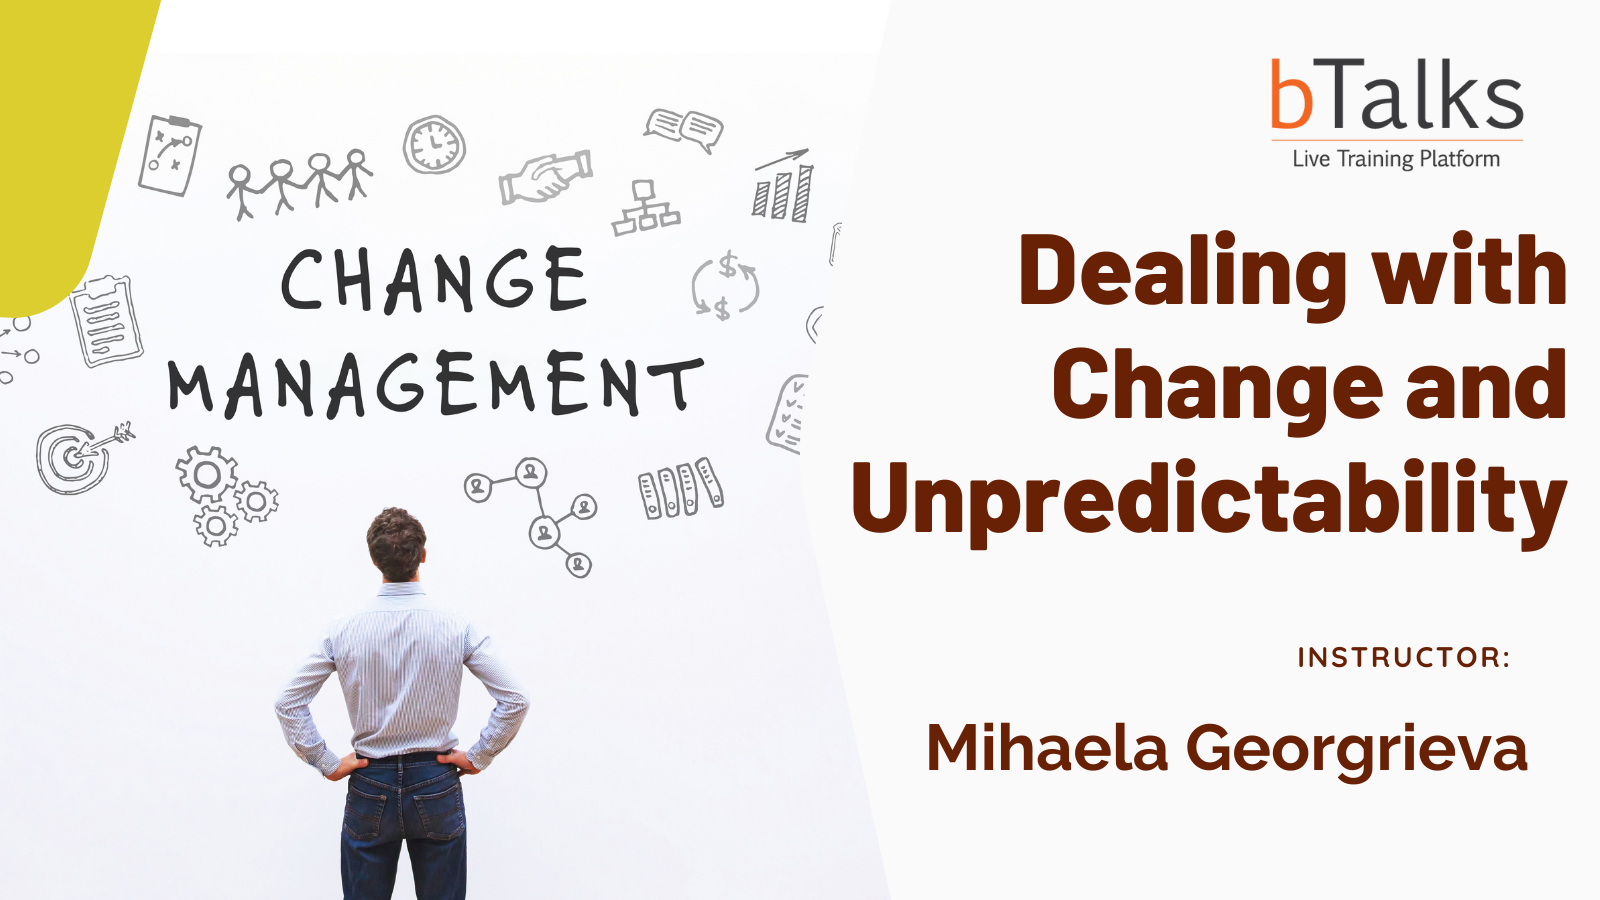 Dealing with Change and Unpredictability